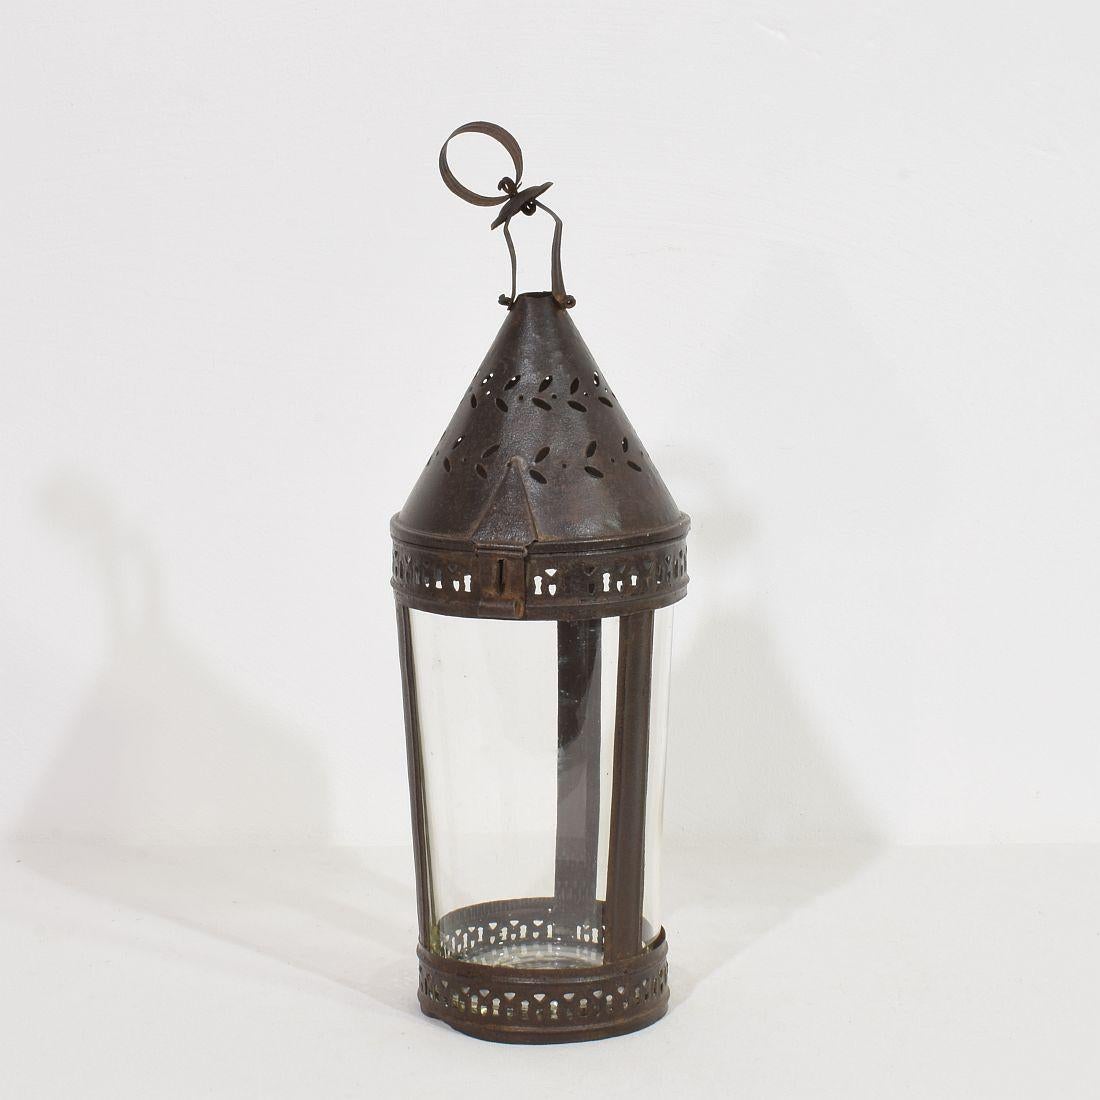 Very rare  folk art lantern, France, circa 1800-1850.

Beautiful weathered. Glass is old but to my opinion of later date.